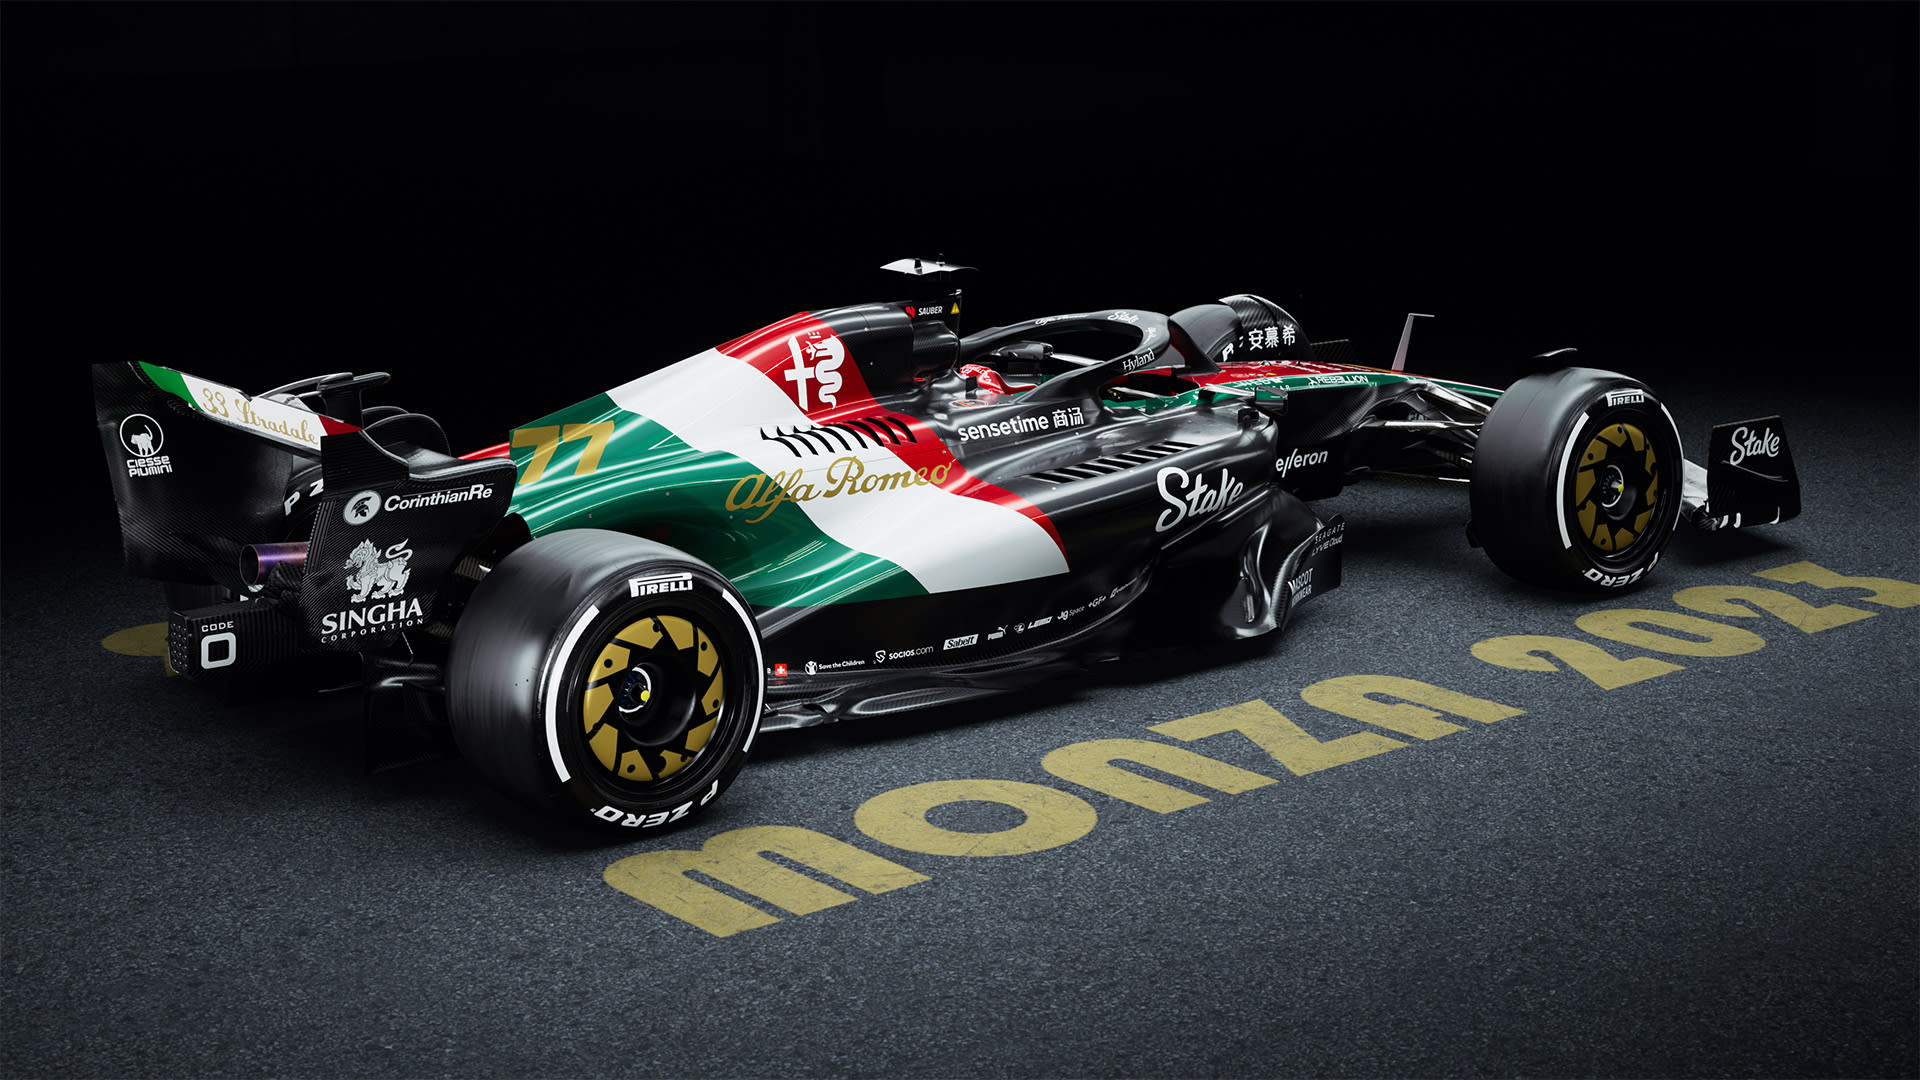 Alfa Romeo unveil new Italian-inspired tribute livery for their